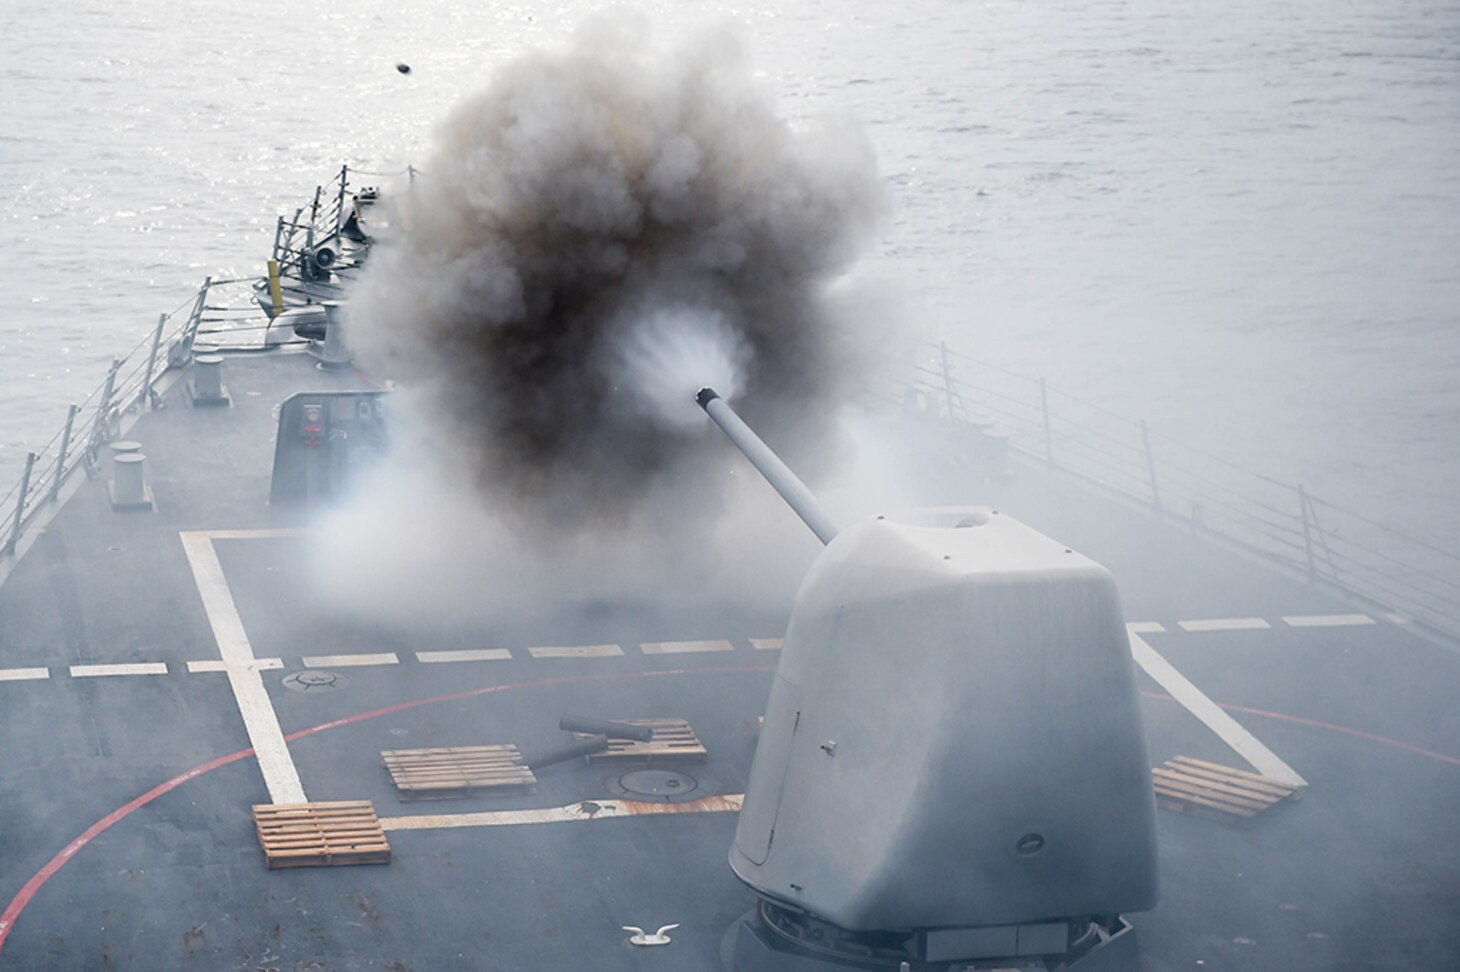 The Arleigh Burke-class guided-missile destroyer USS Stethem (DDG 63) conducts a firing exercise of the MK 45/5-inch lightweight gun at a surface target during Cooperation Afloat Readiness and Training (CARAT) Singapore 2016, July 26. CARAT is a series of annual maritime exercises between the U.S. Navy, U.S. Marine Corps and the armed forces of nine partner nations to include Bangladesh, Brunei, Cambodia, Indonesia, Malaysia, the Philippines, Singapore, Thailand, and Timor-Leste. 